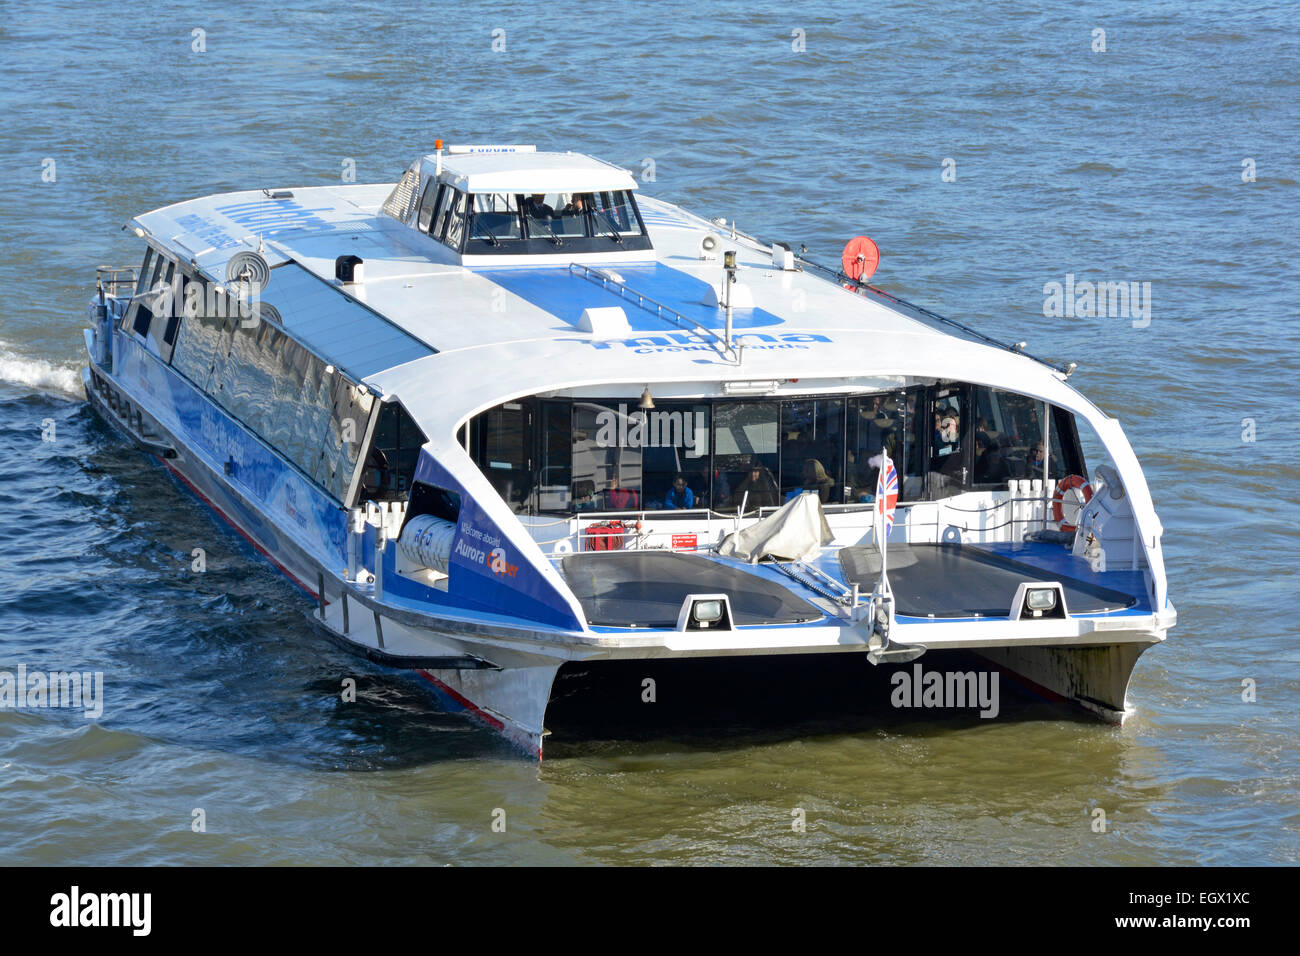 Aerial roof view Thames clipper high speed catamaran commuter and tourist river bus public transport service River Thames City of London England UK Stock Photo